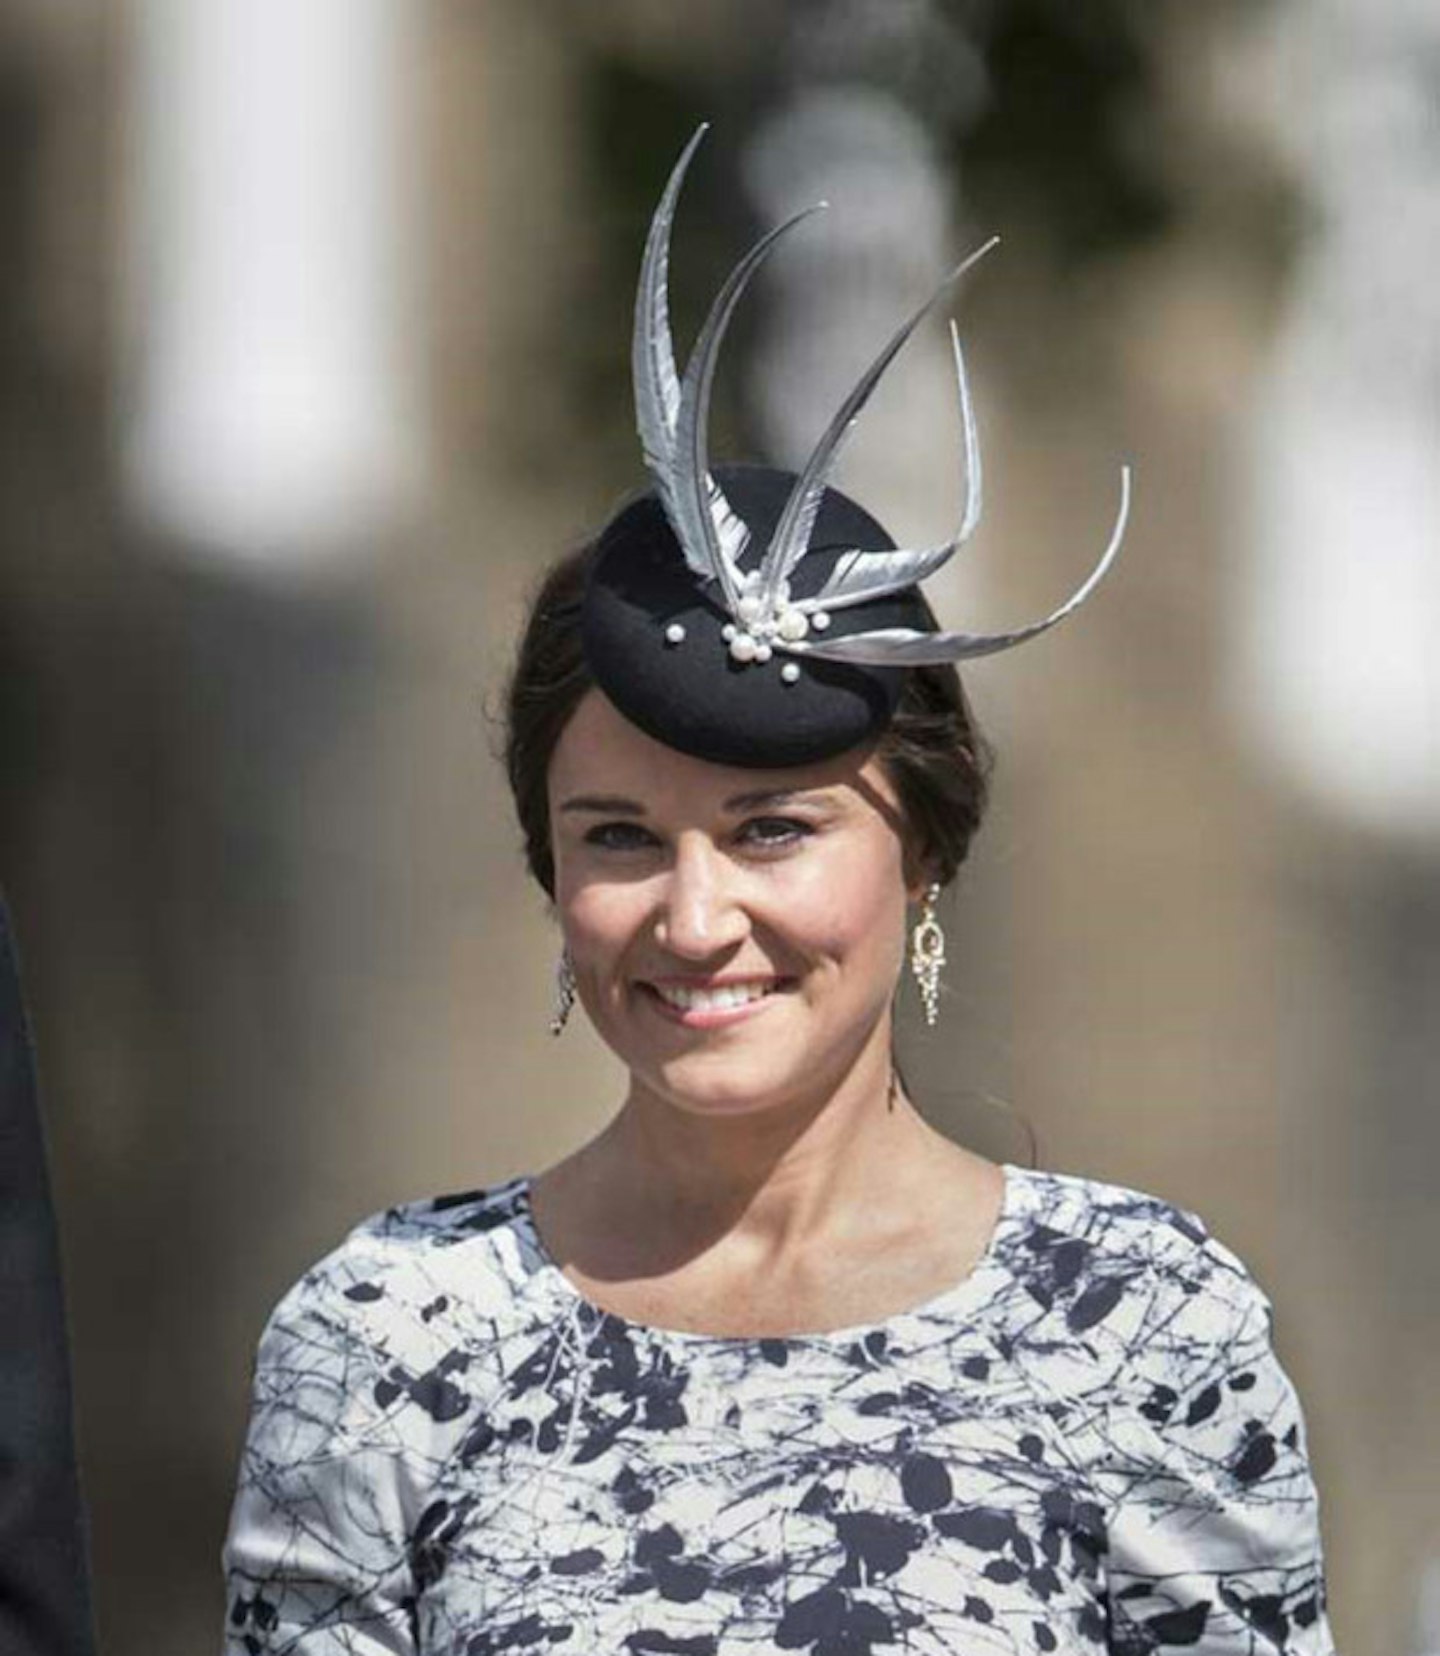 Pippa has thousands of fabulous fascinators waiting to be borrowed